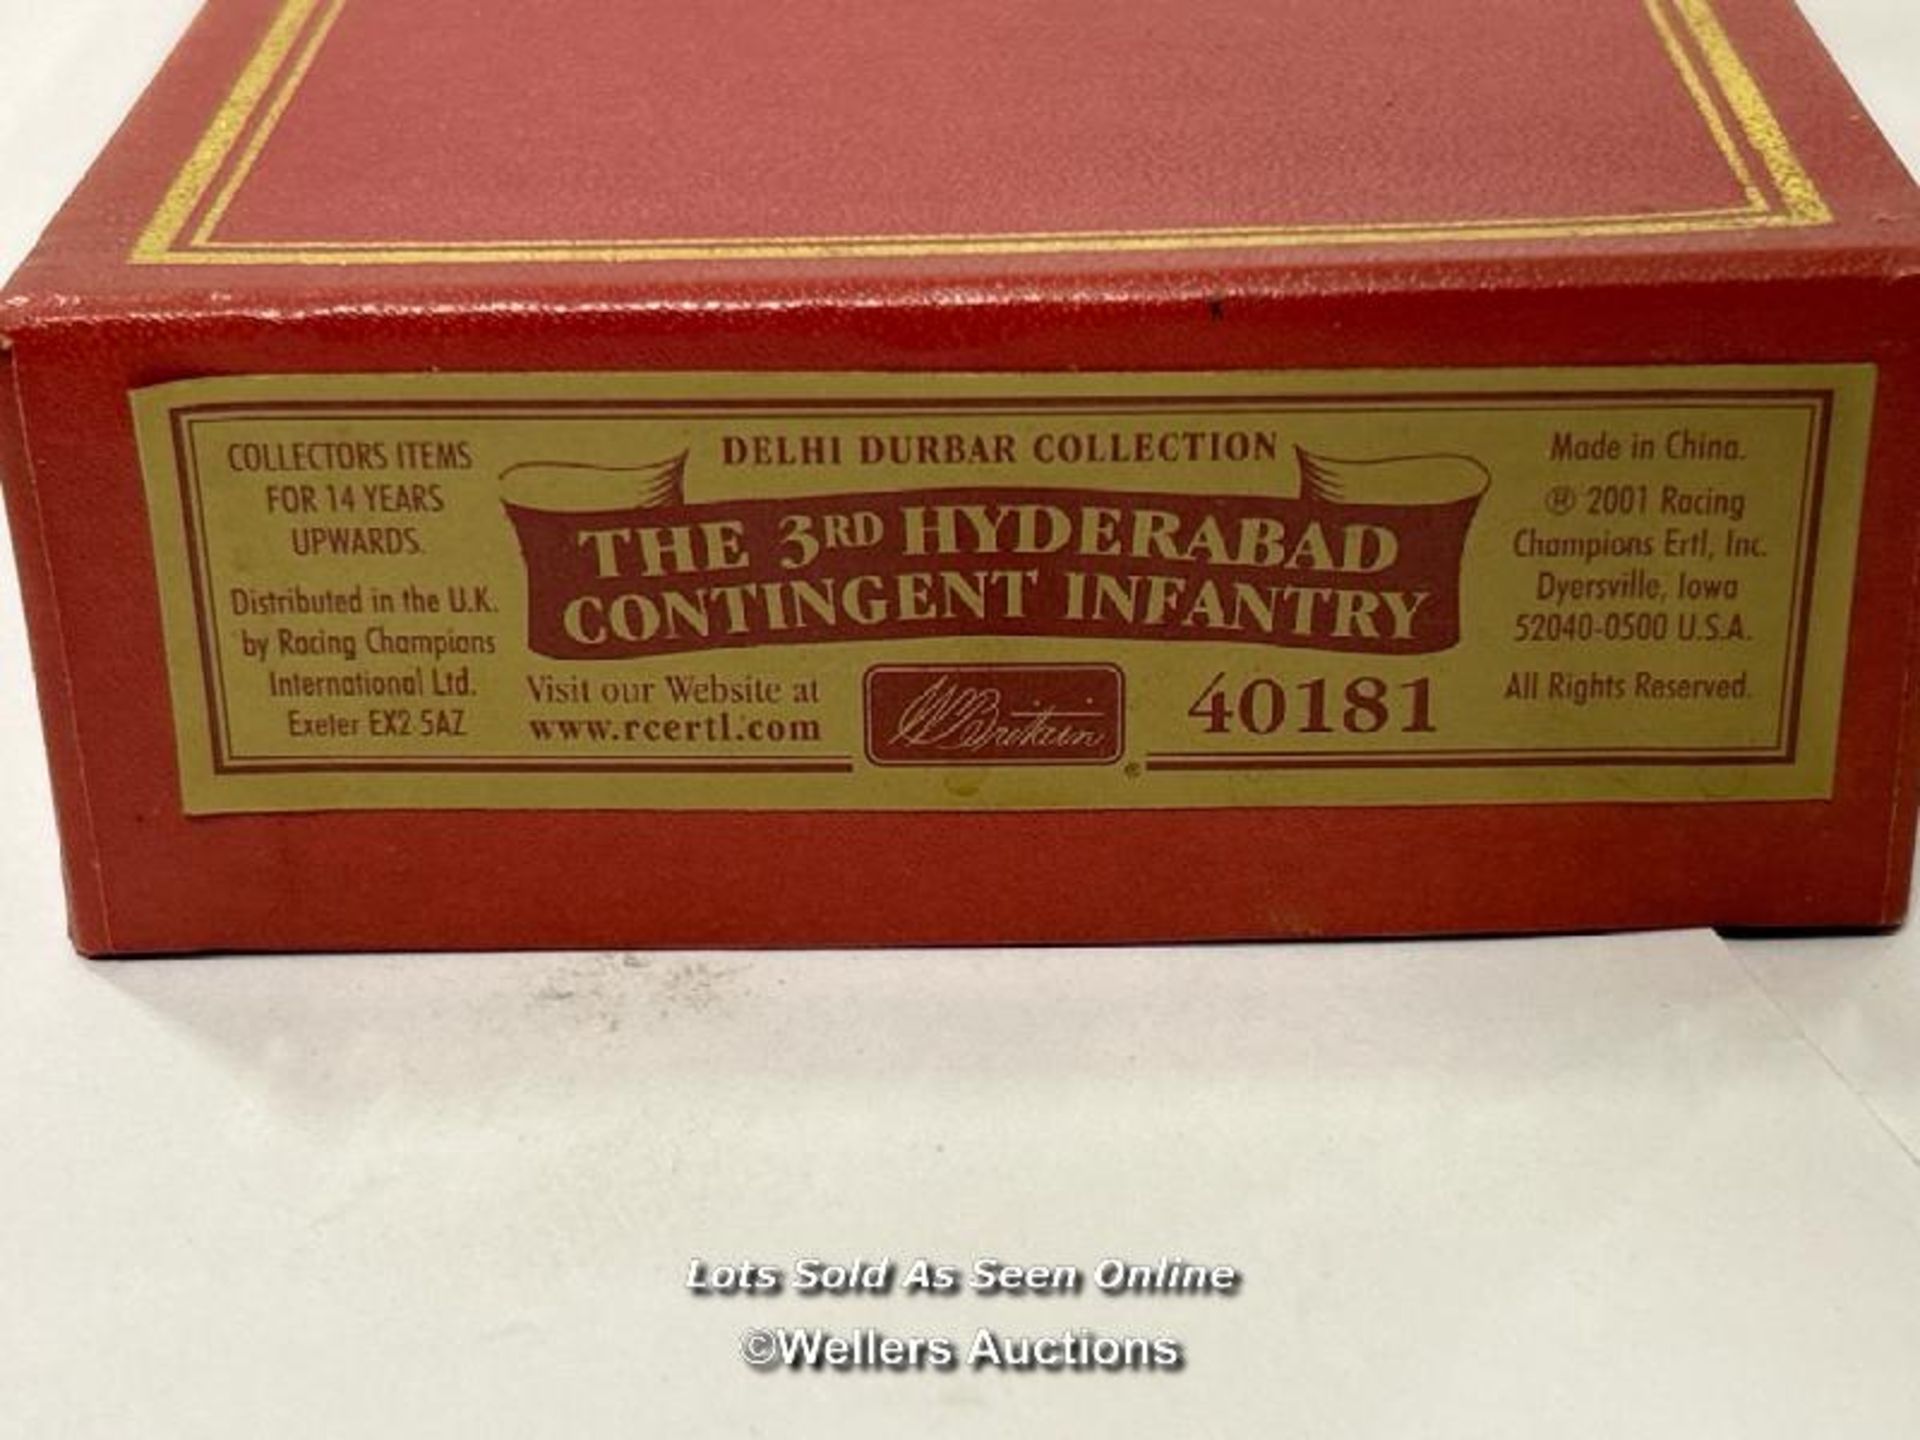 Britain's Delhi Durbar Collection set 40181 "The 3rd Hyderabad Contingent Infantry" boxed / AN5 - Image 3 of 3